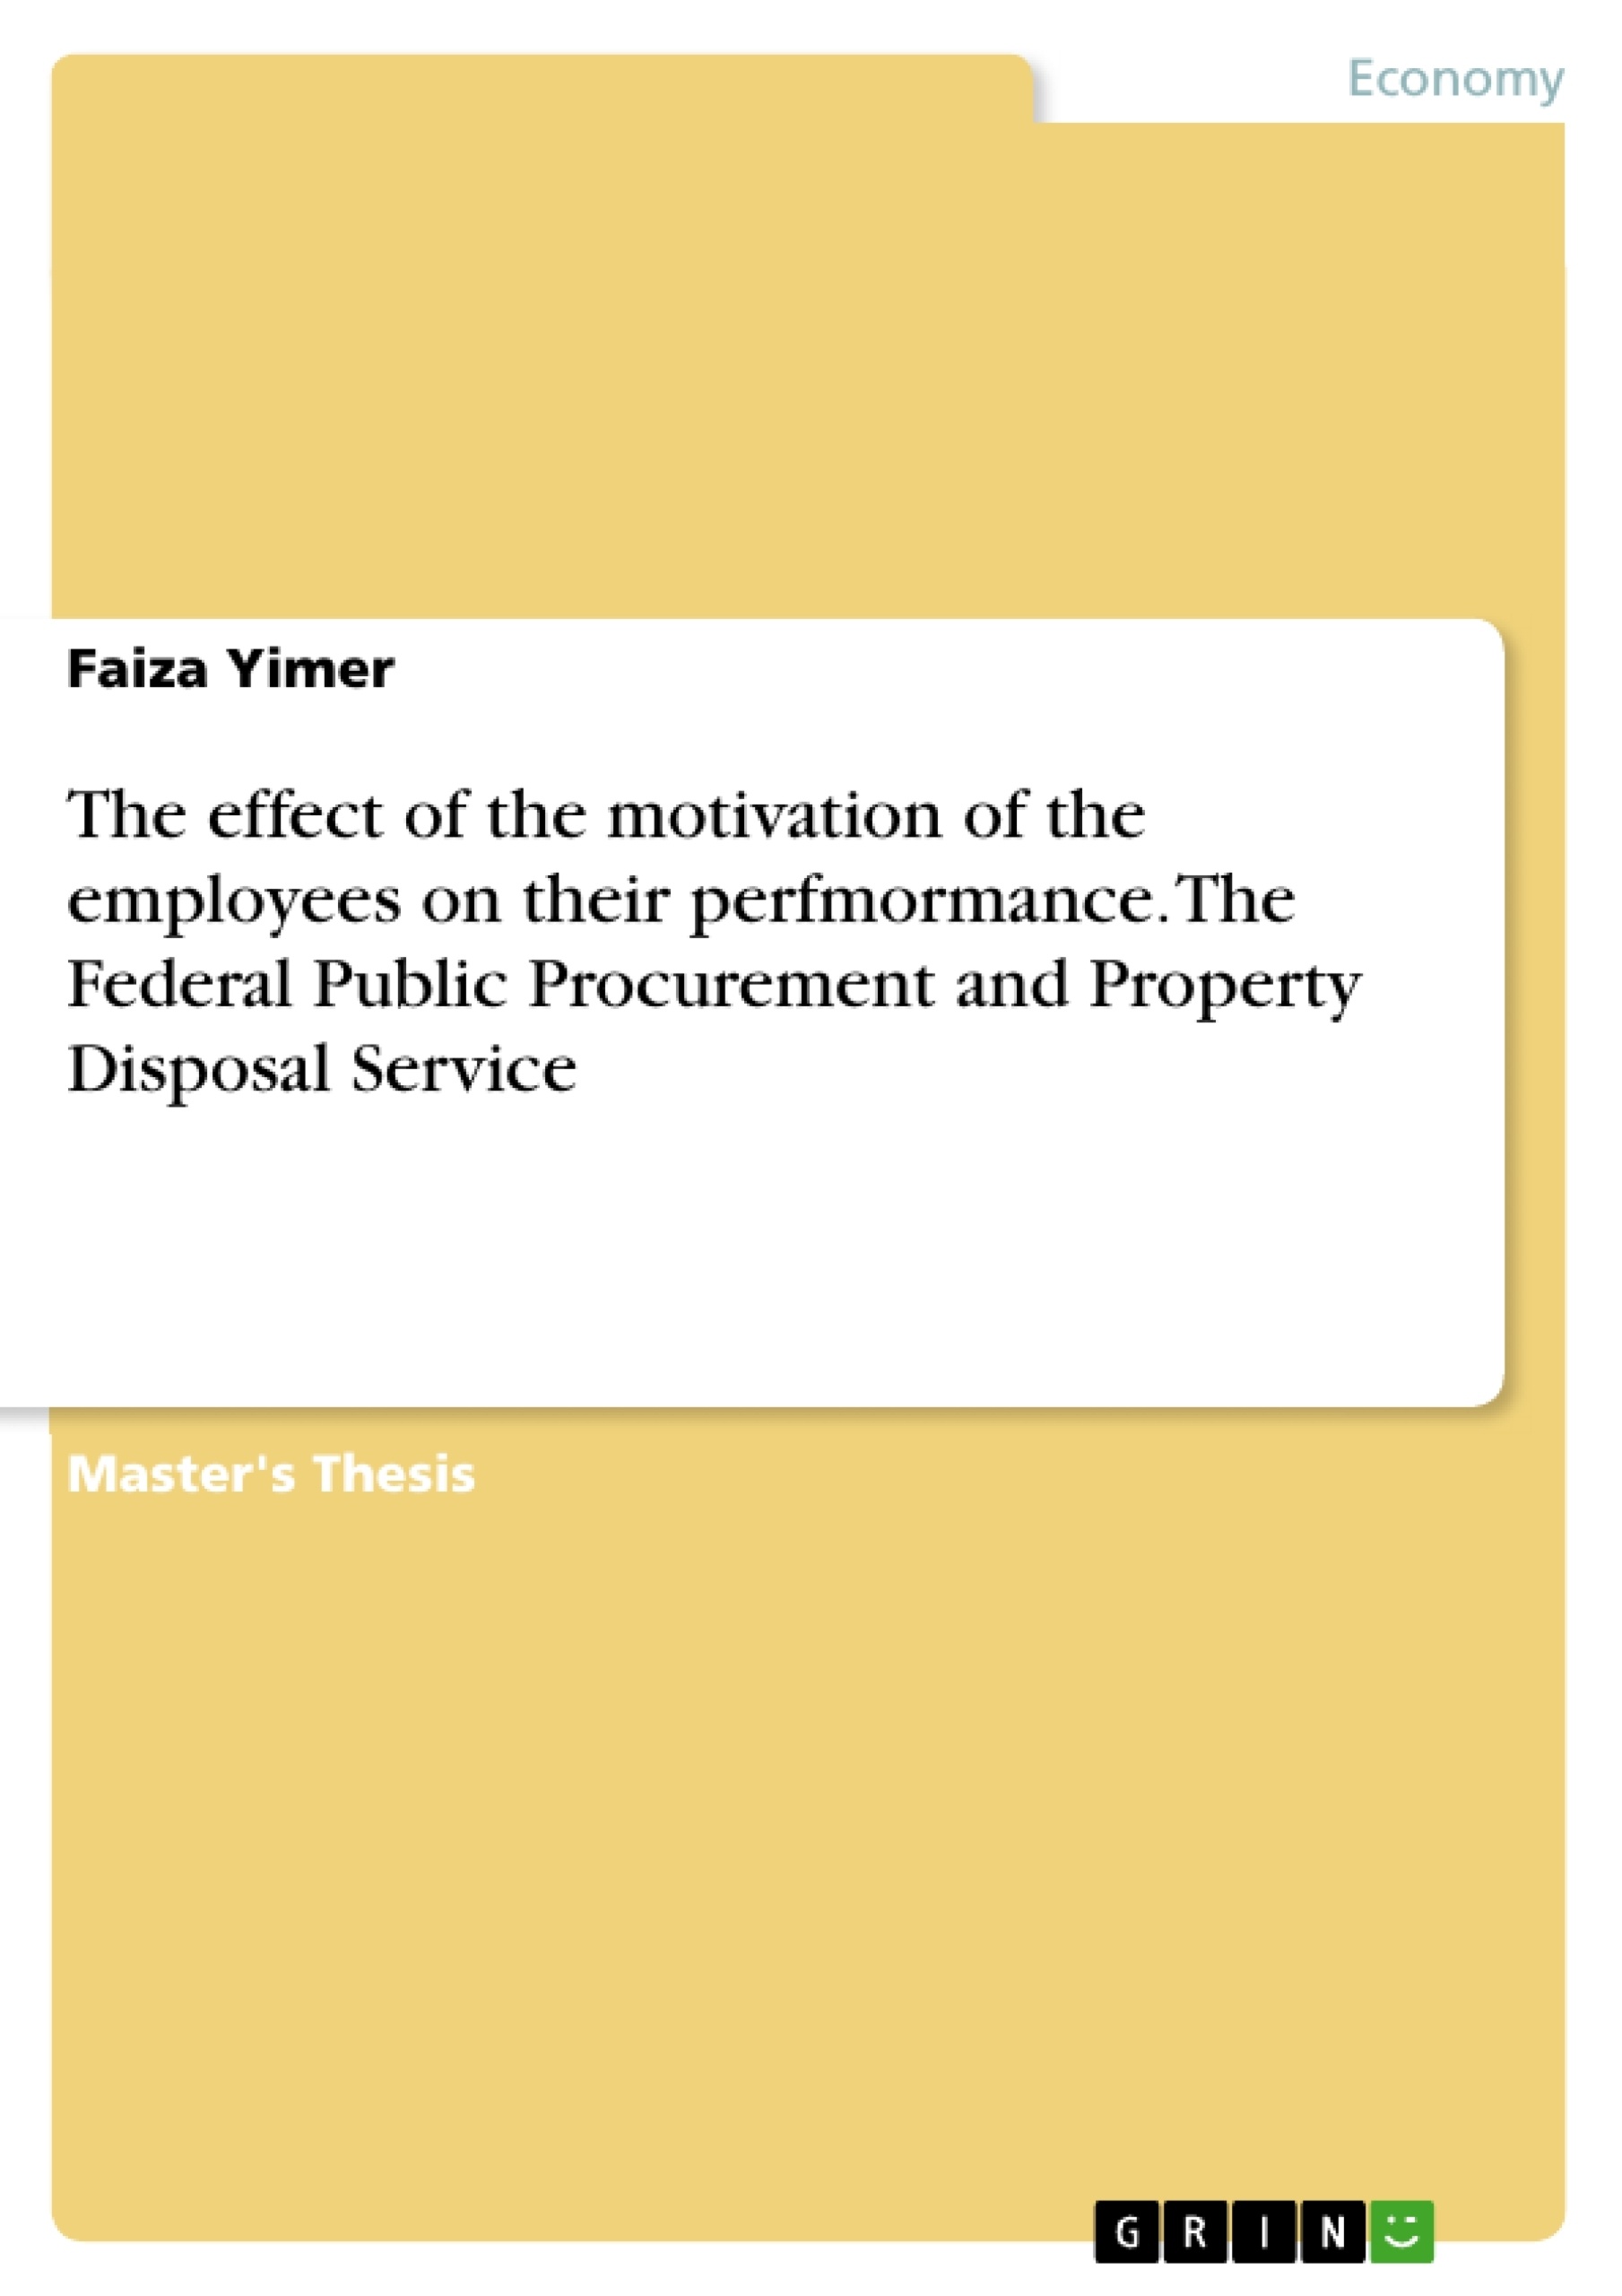 Titre: The effect of the motivation of the employees on their perfmormance. The Federal Public Procurement and Property Disposal Service